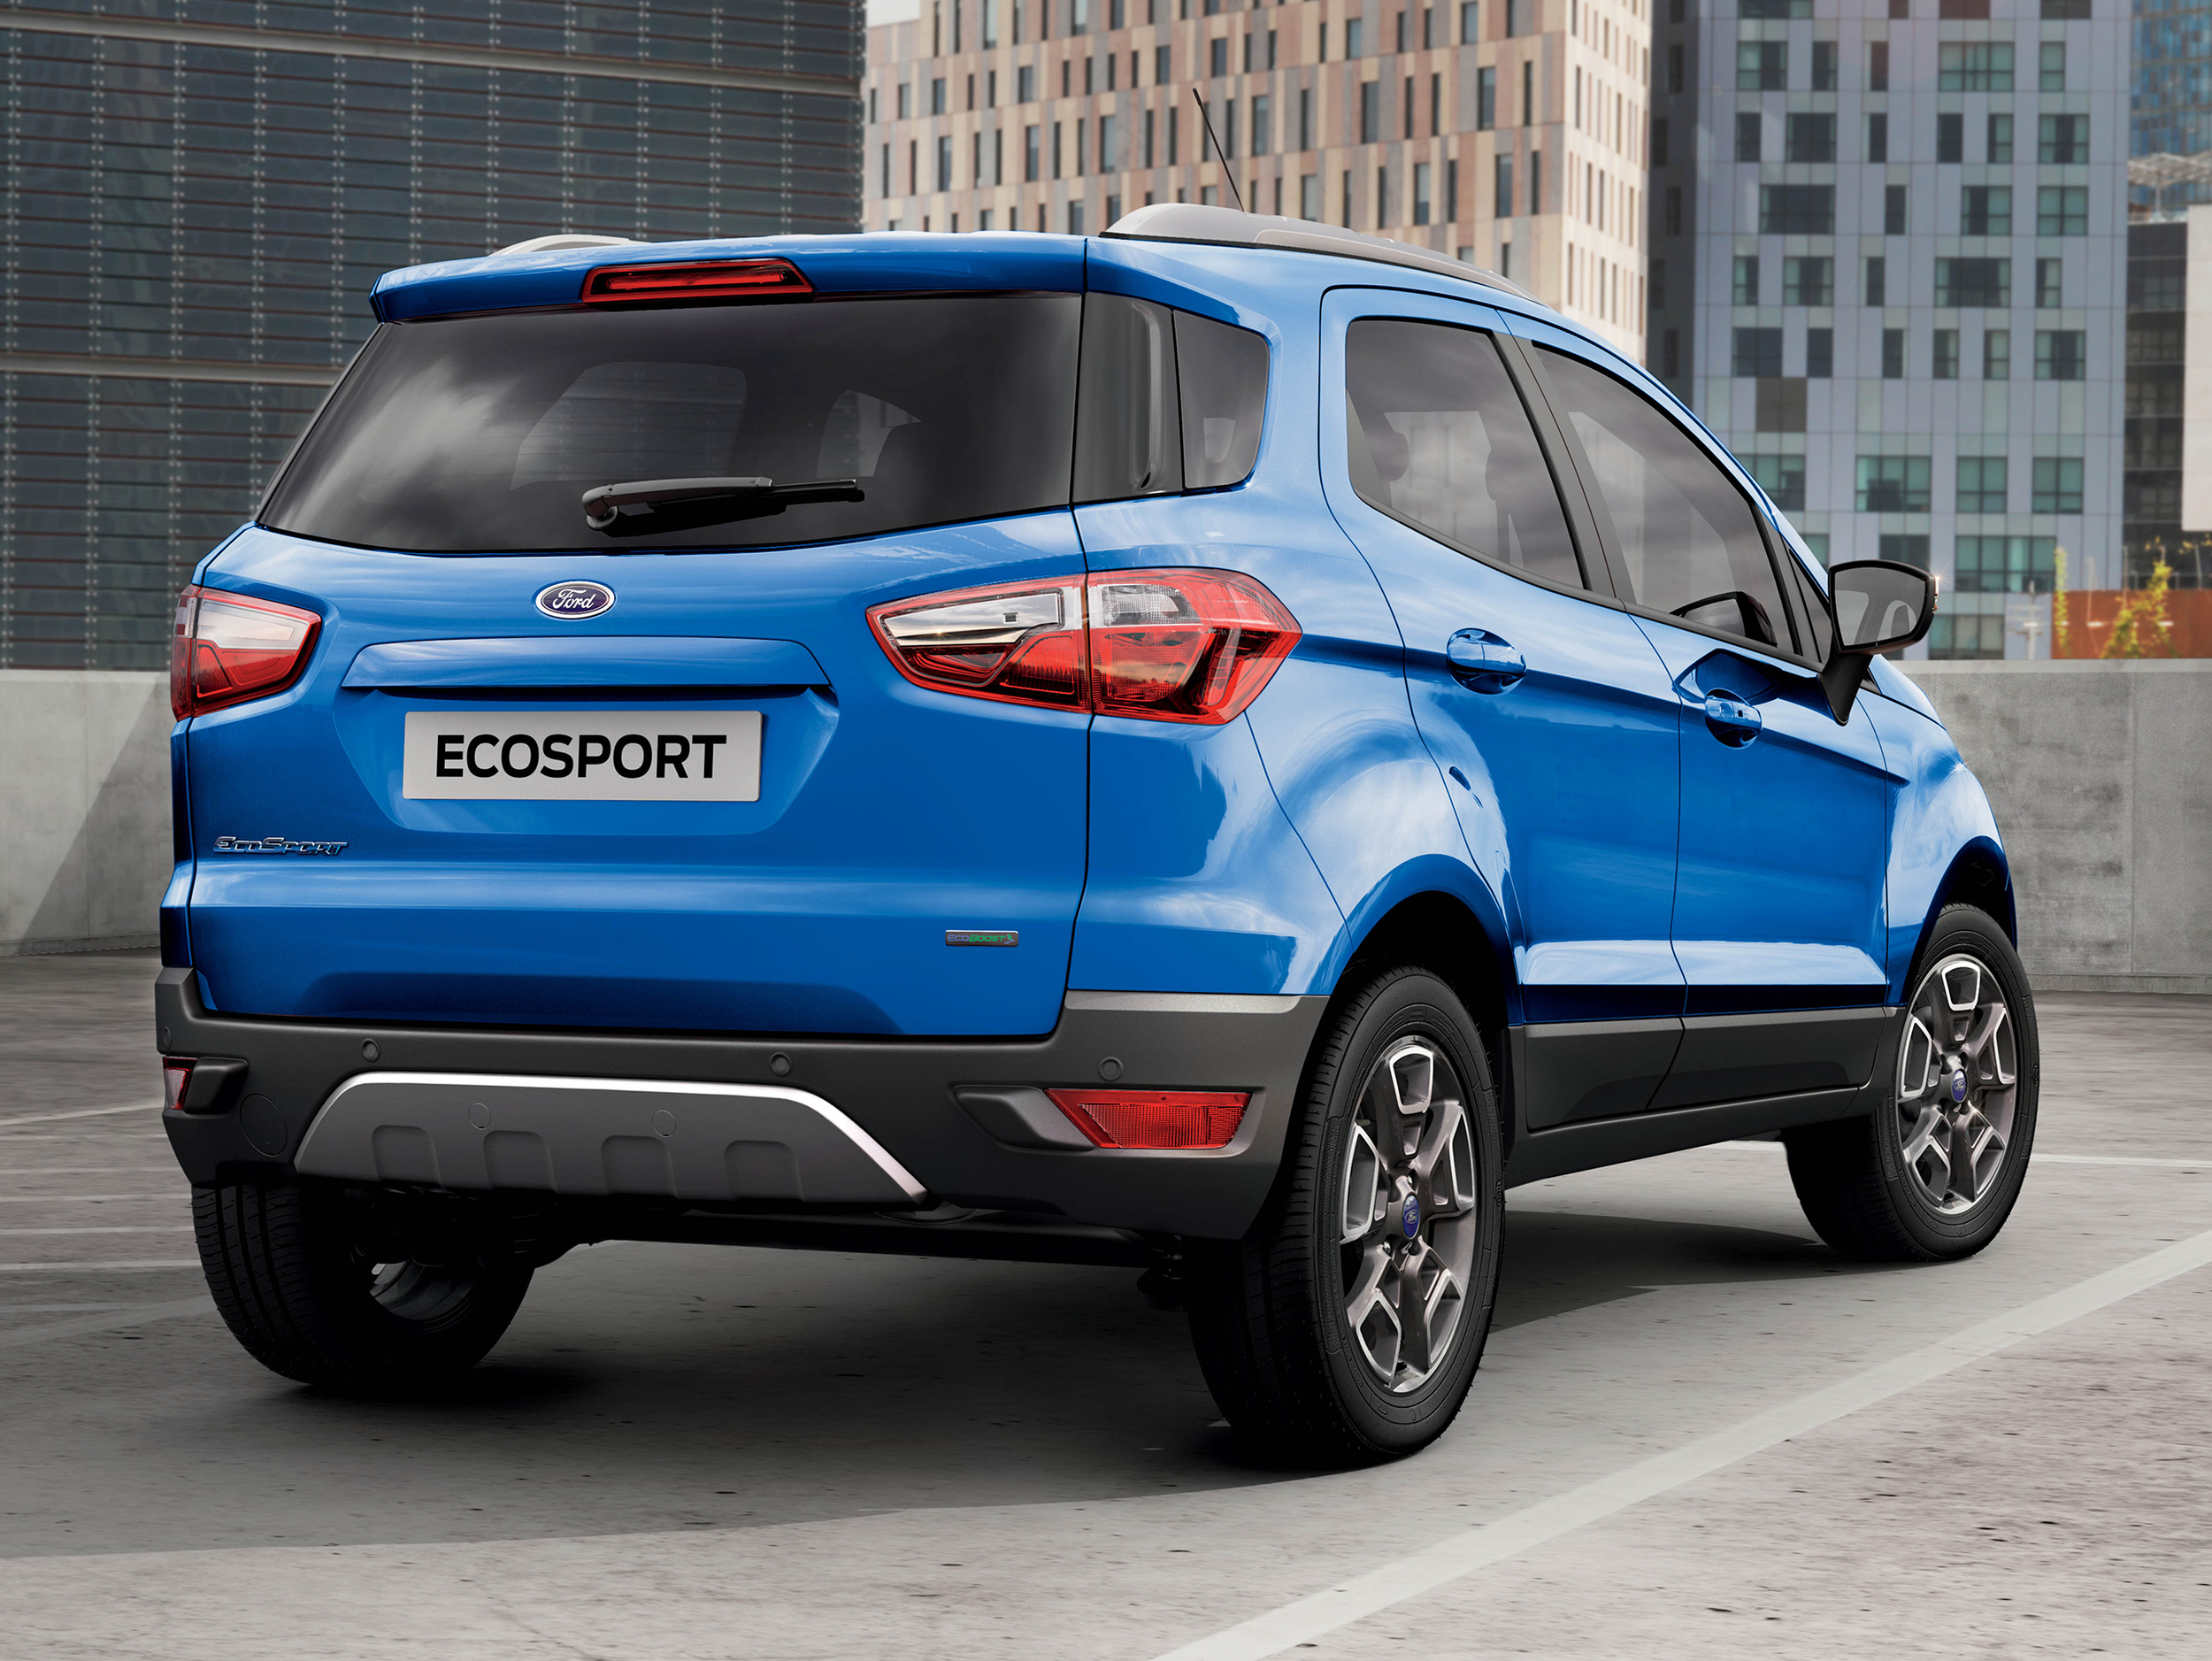 Ford EcoSport gets new upgrades